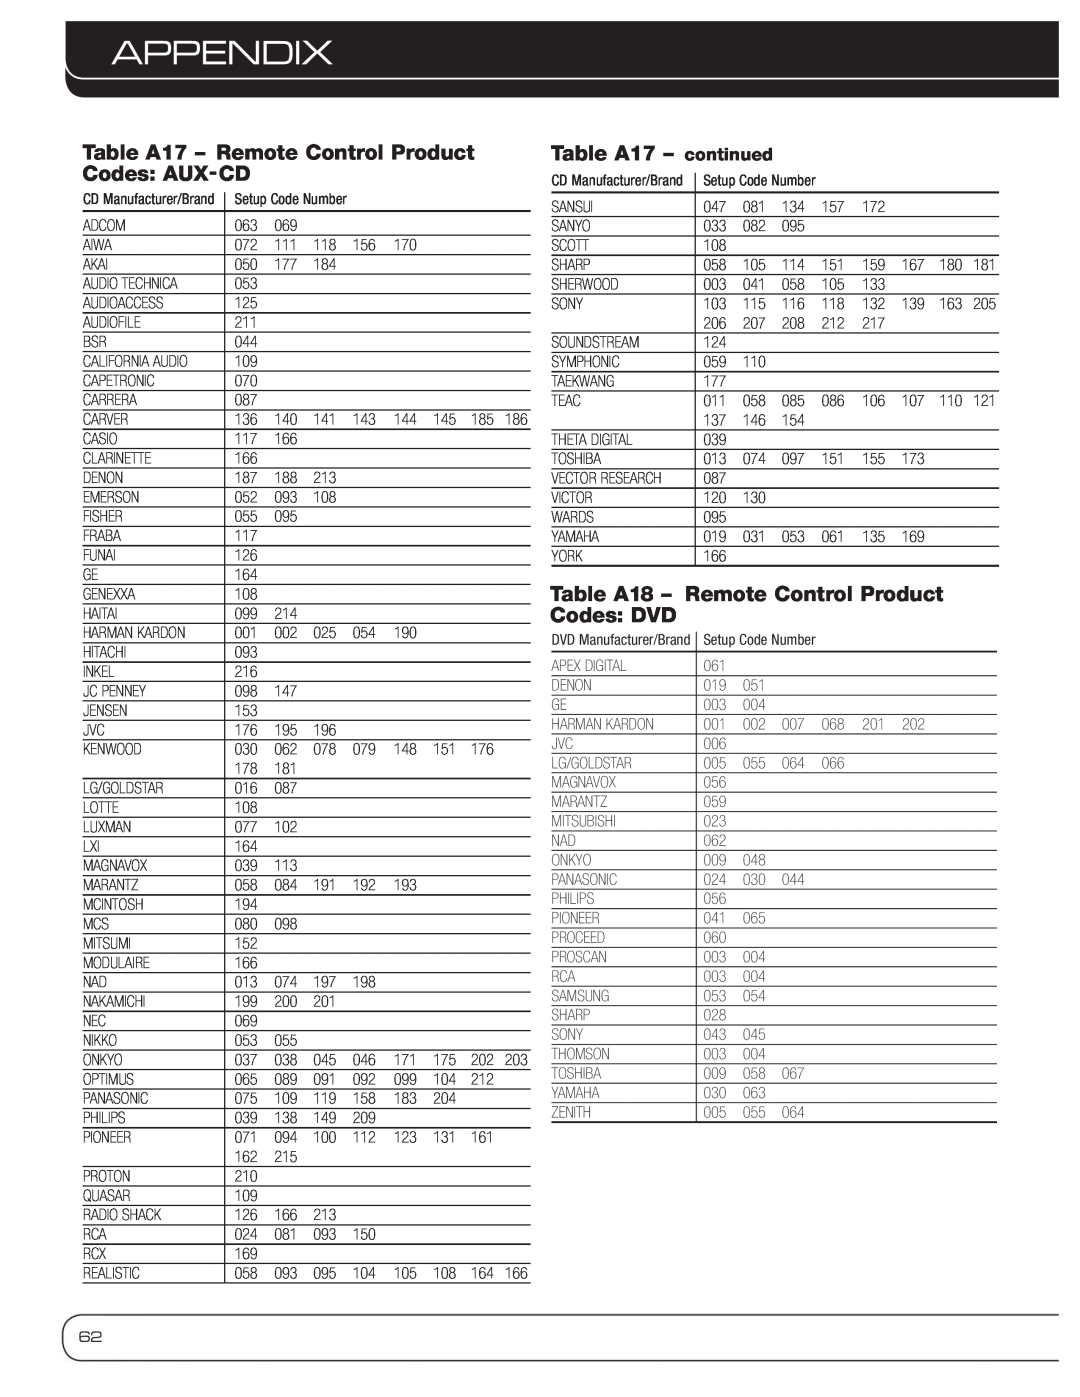 Harman-Kardon AVR 3600 owner manual Table A17 – Remote Control Product Codes: AUX-CD, Table A17 – continued, Appendix 